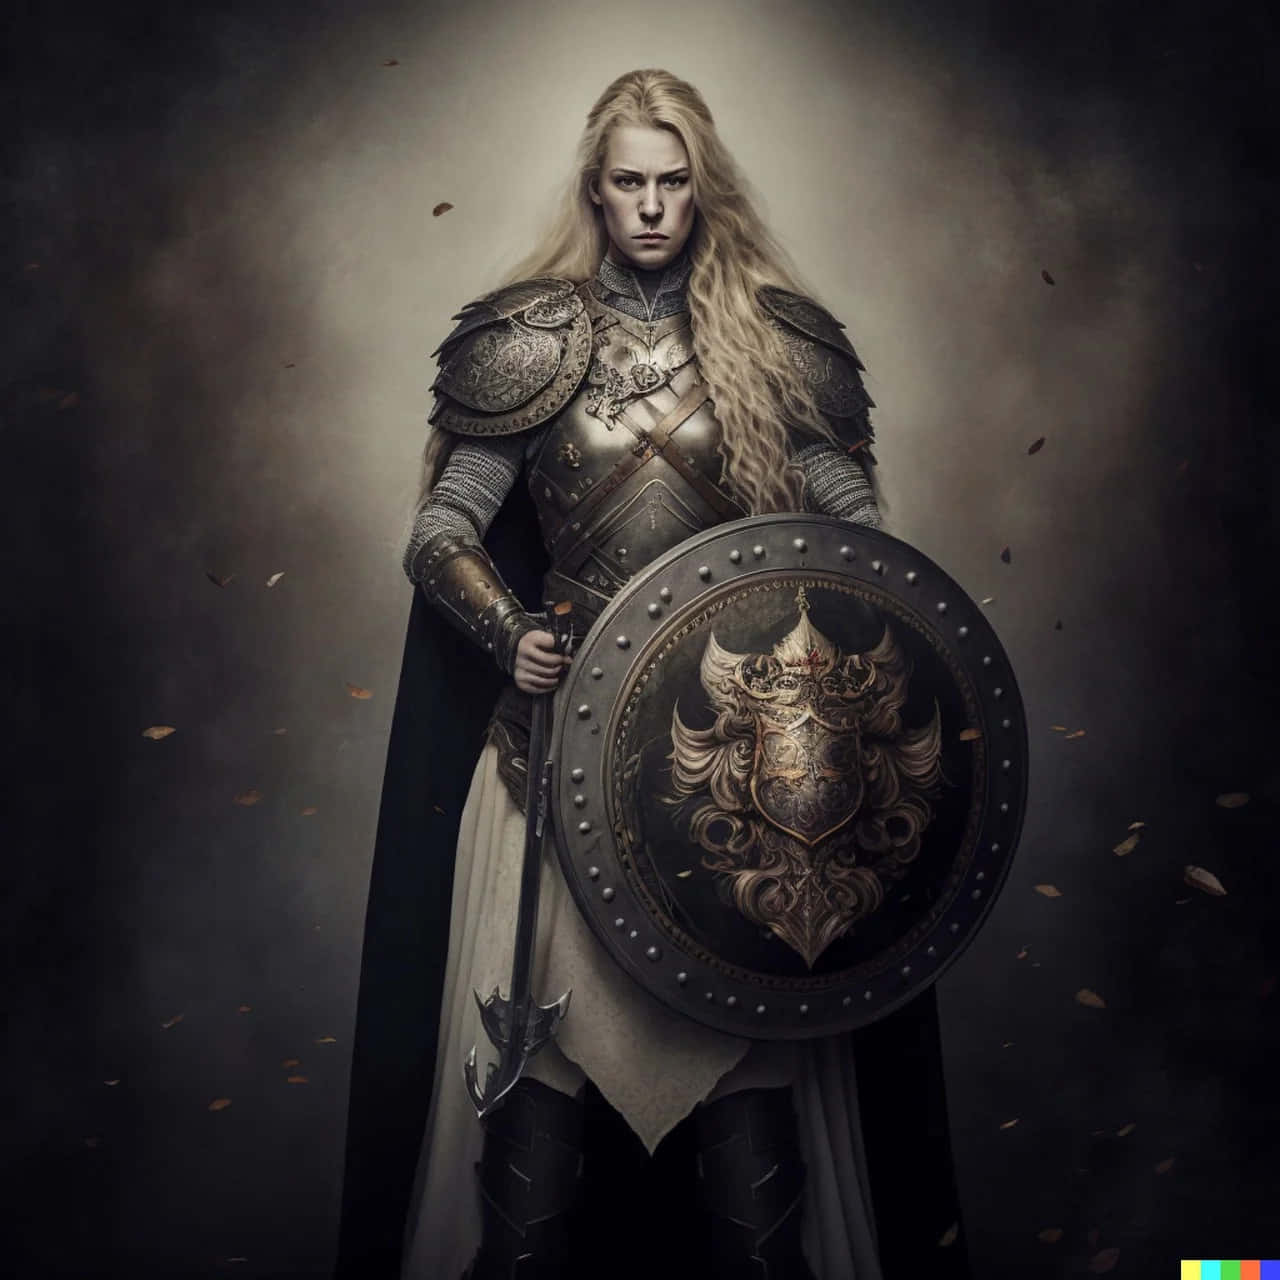 Viking shieldmaidens - some say the warrior women did not exist